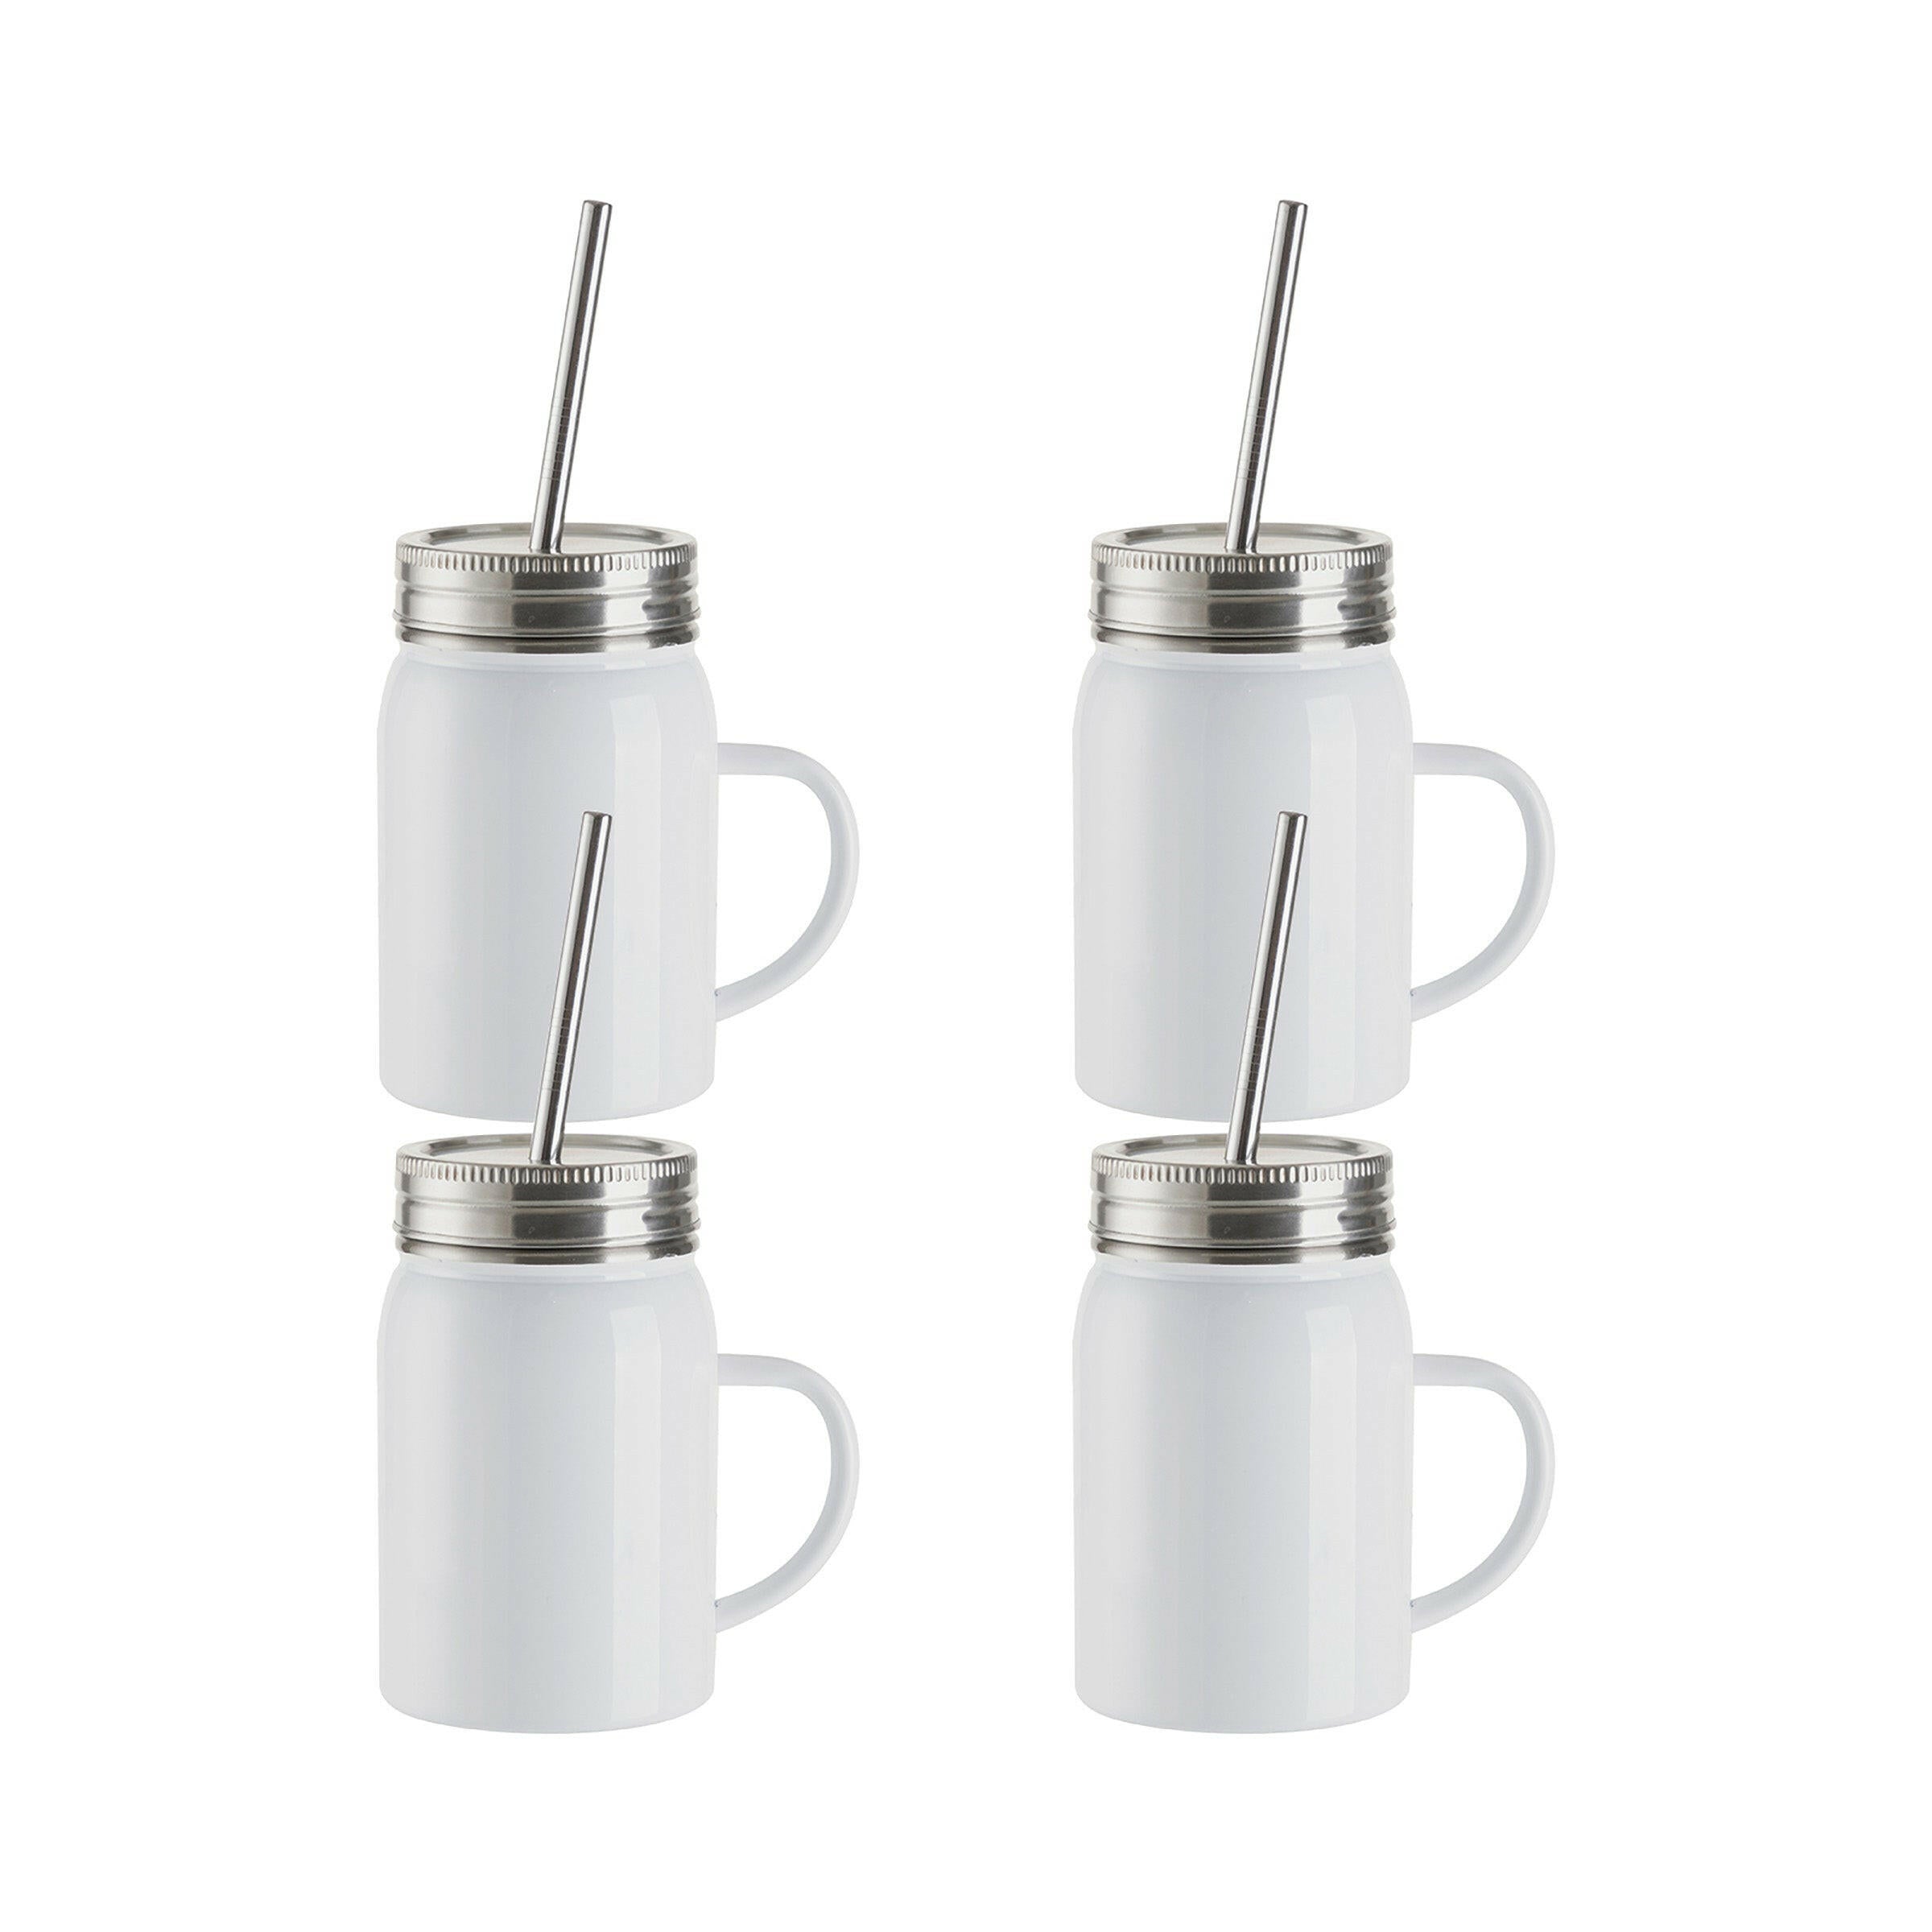 17oz Stainless Steel Handled Lidded Mason Jars With Straws - 4 Pack.